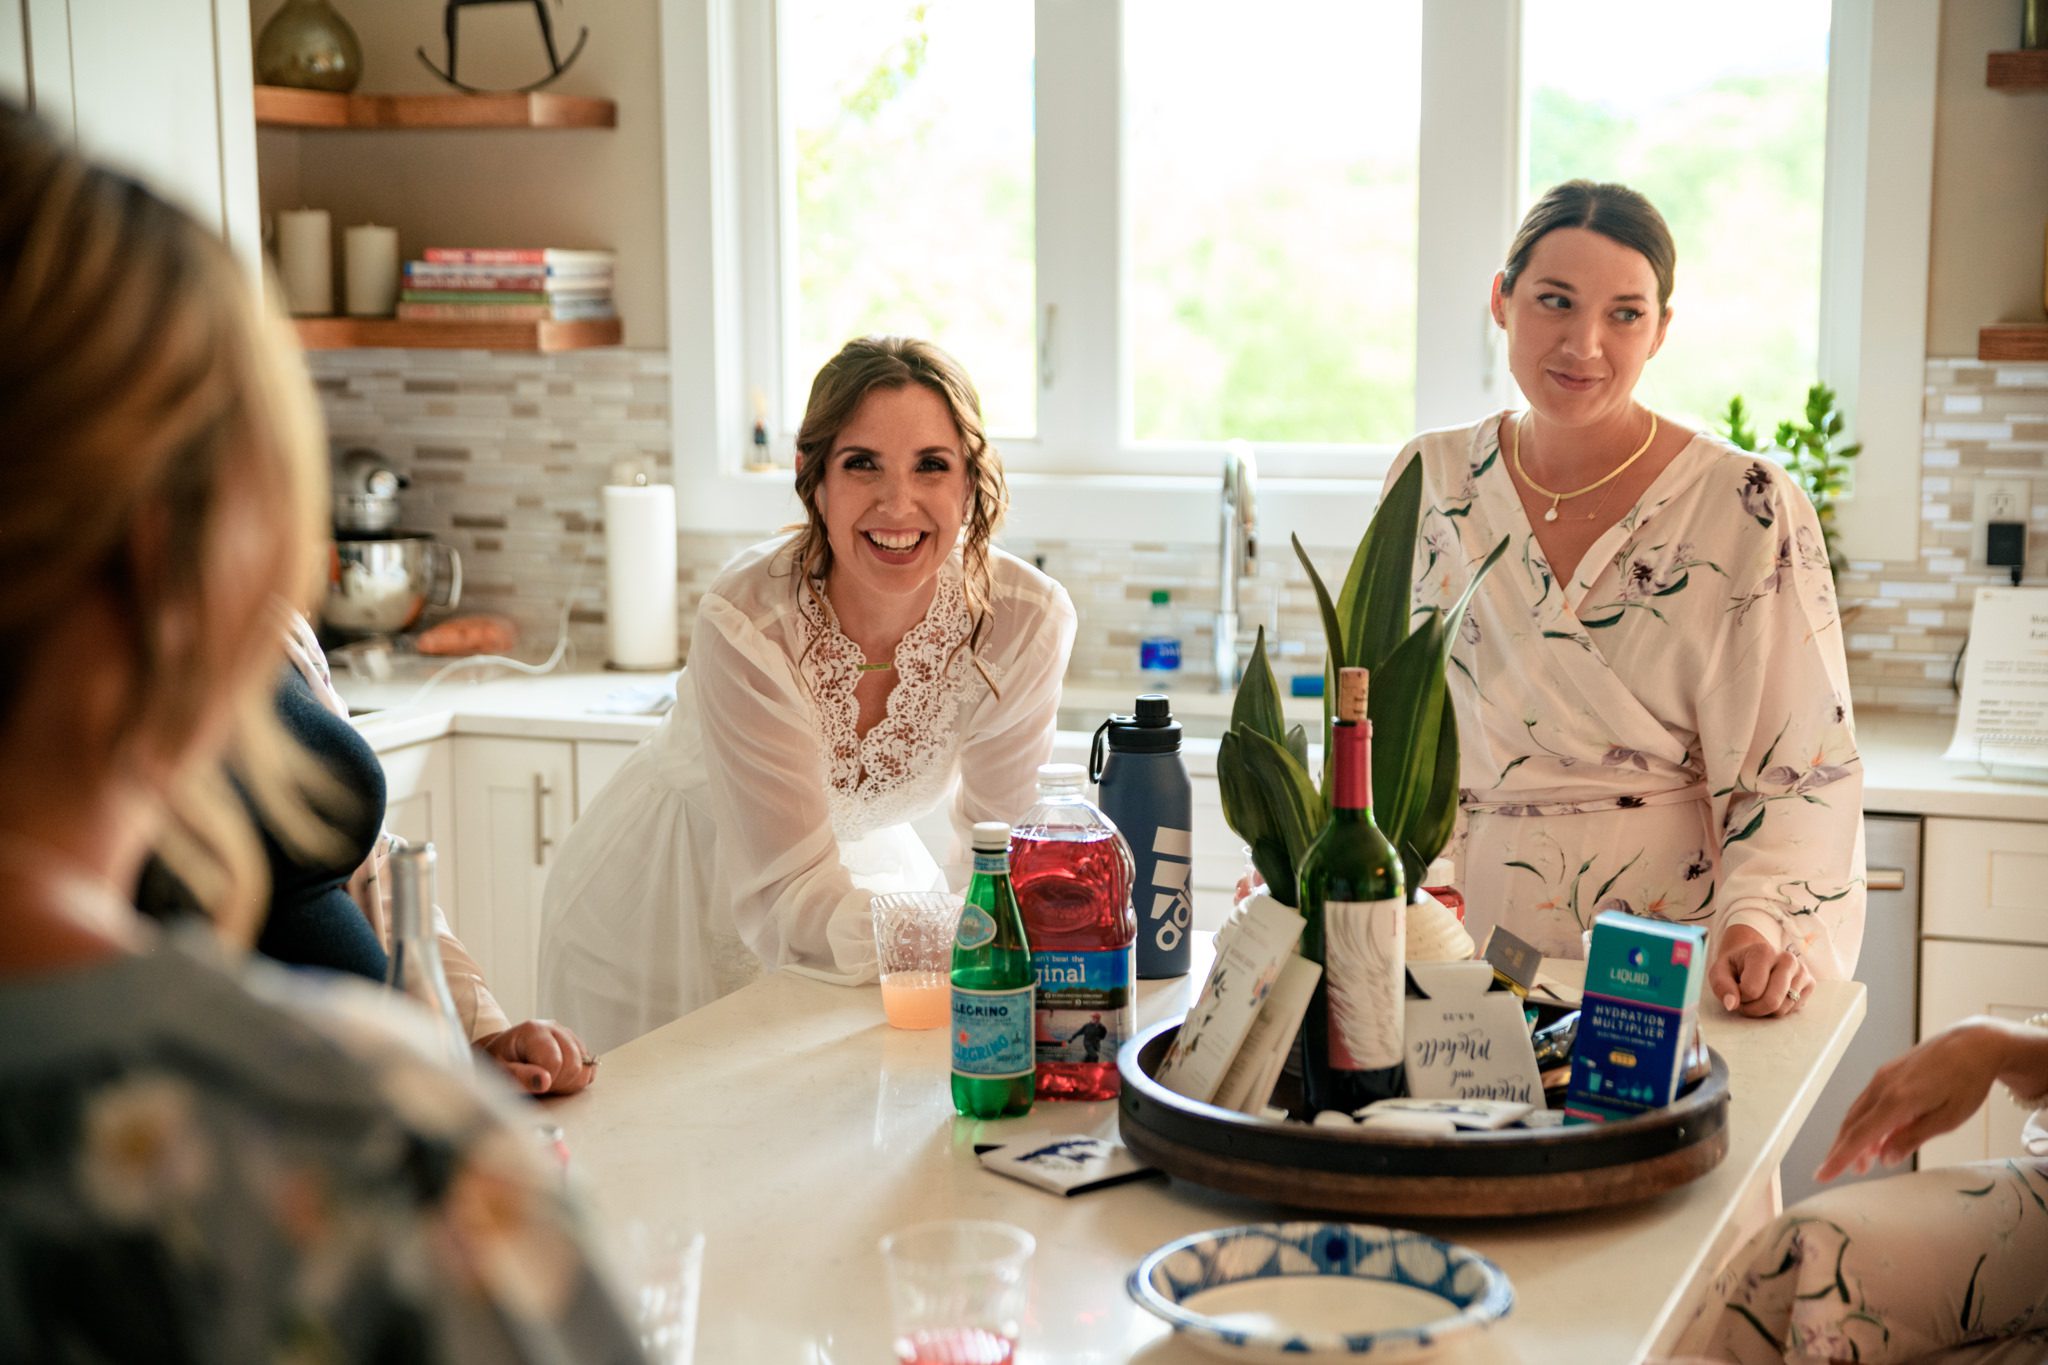 A group of women at Crest Pavilion, gathered around a kitchen counter, captured by a documentary wedding photographer.